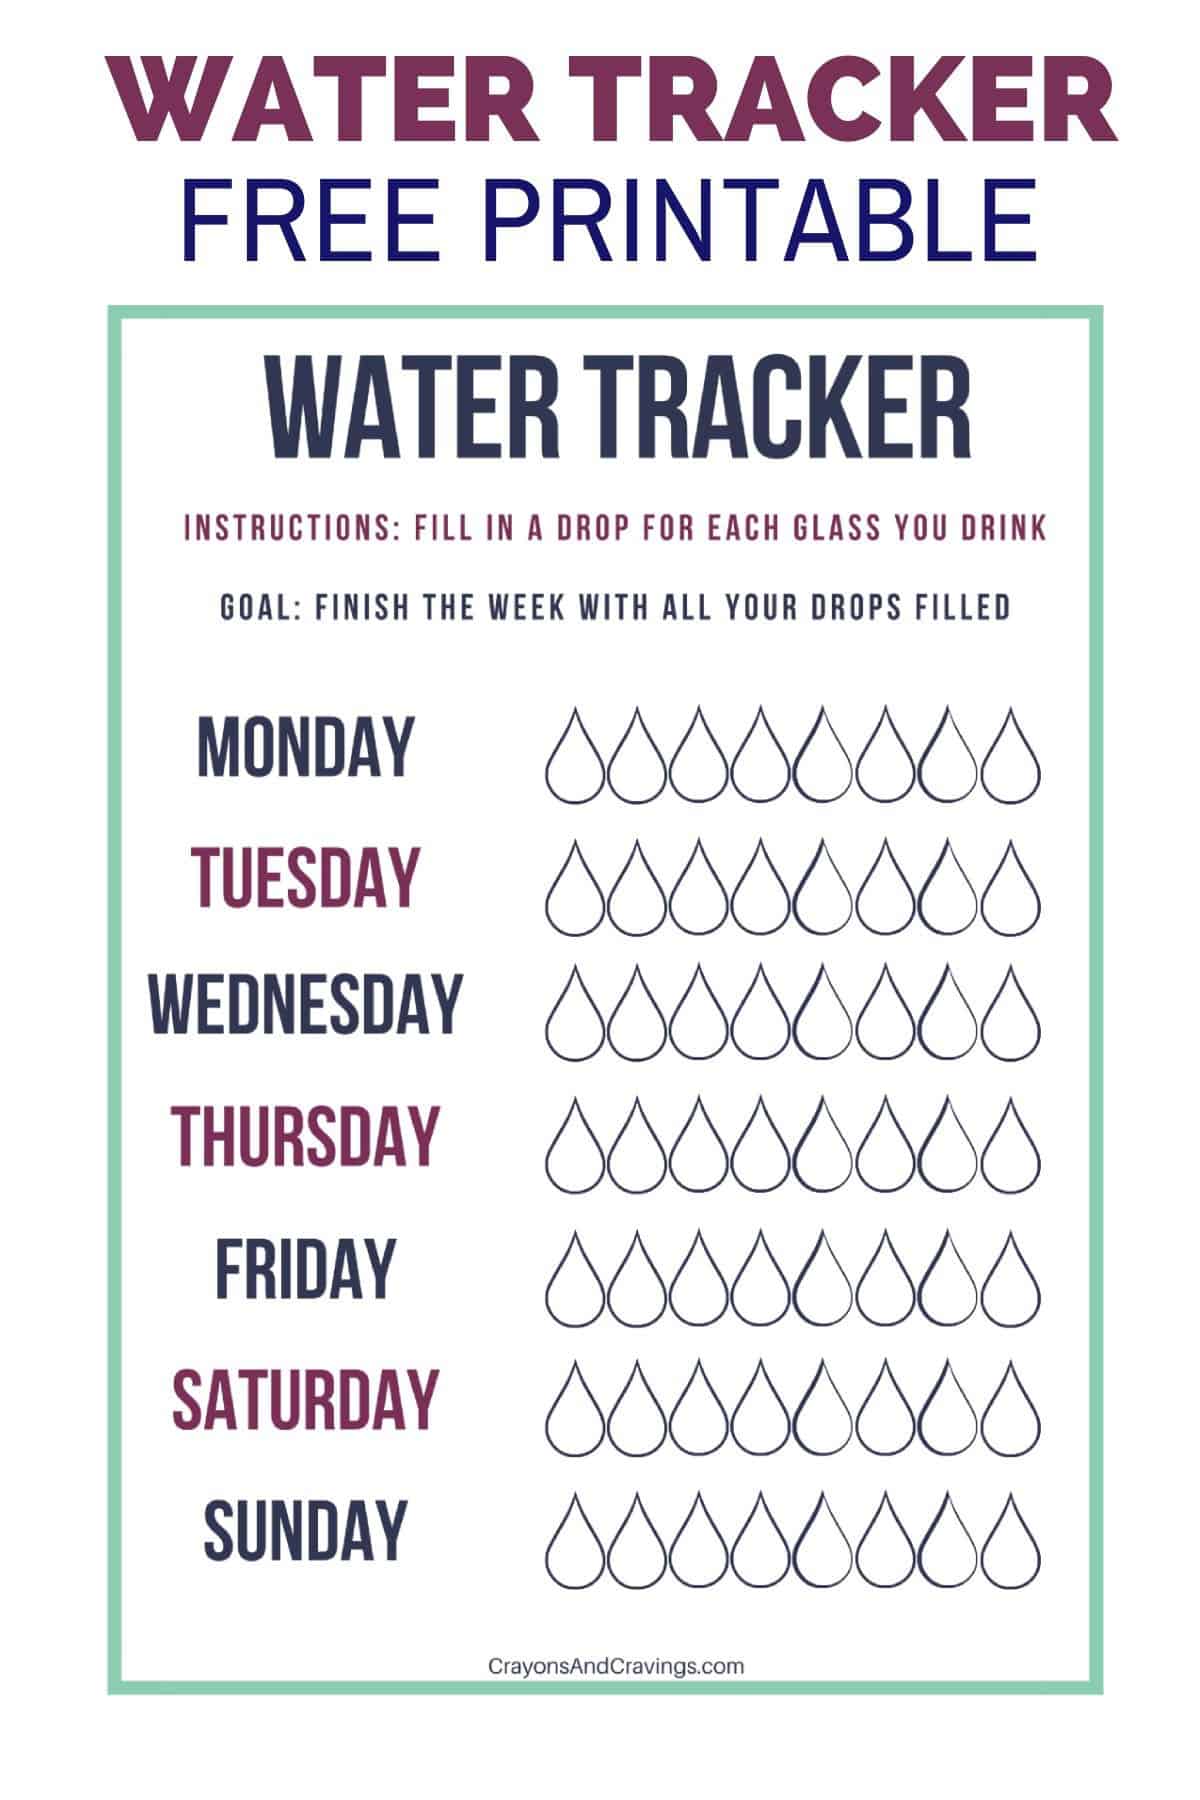 Water tracker free printable with 8 hollow water drops to be filled in per day, for all 7 days of the week.